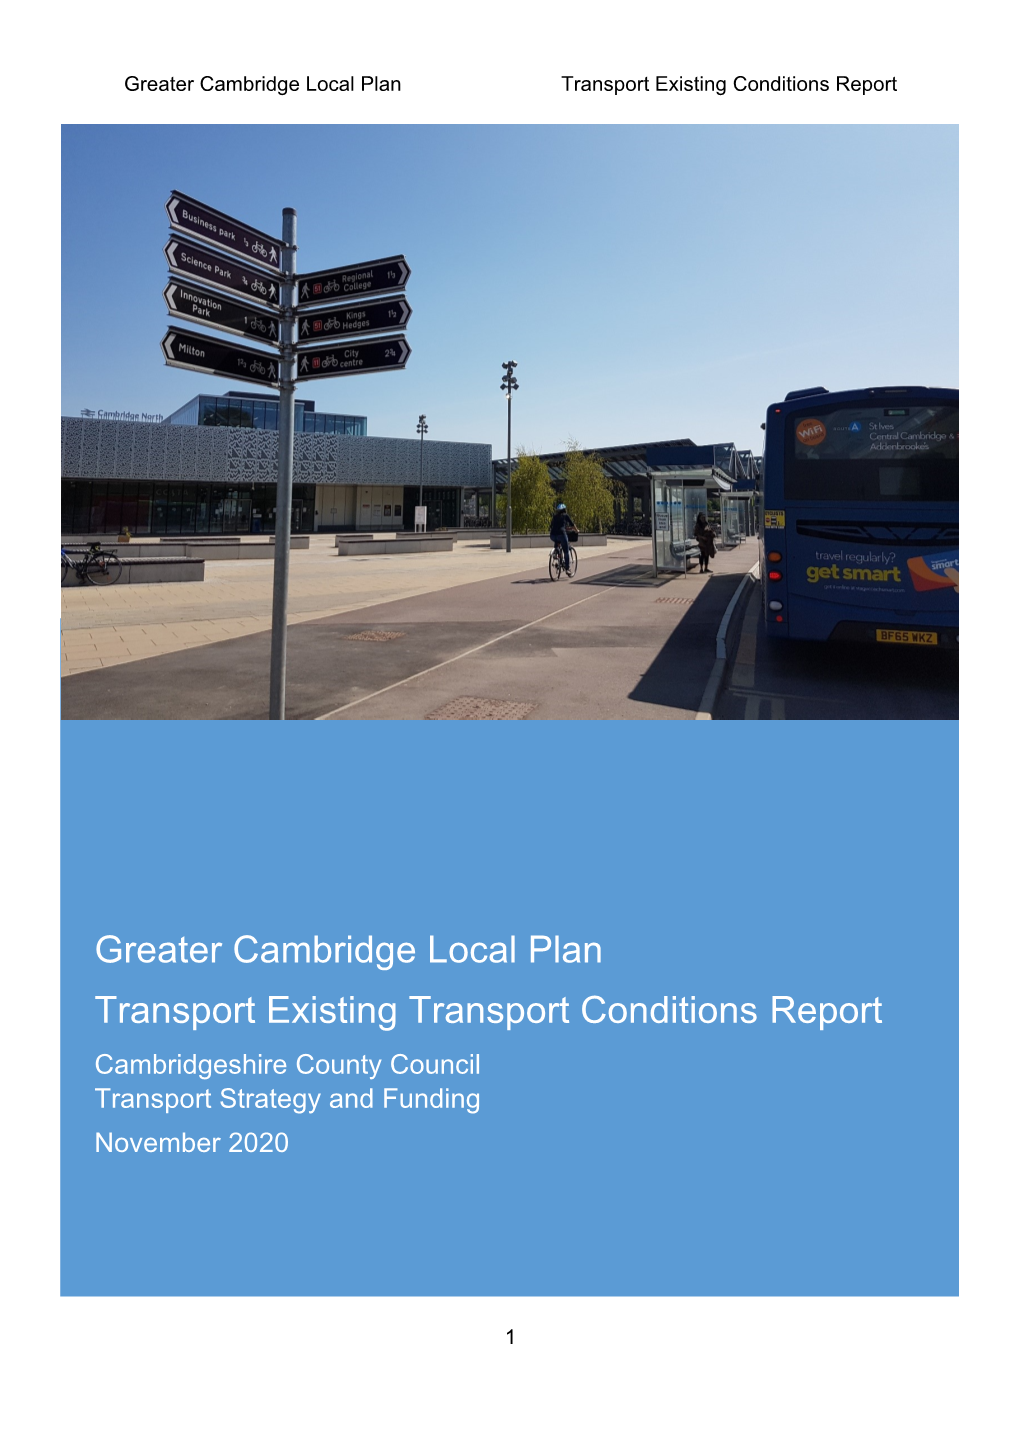 Existing Transport Conditions Report (Cambridgeshire County Council